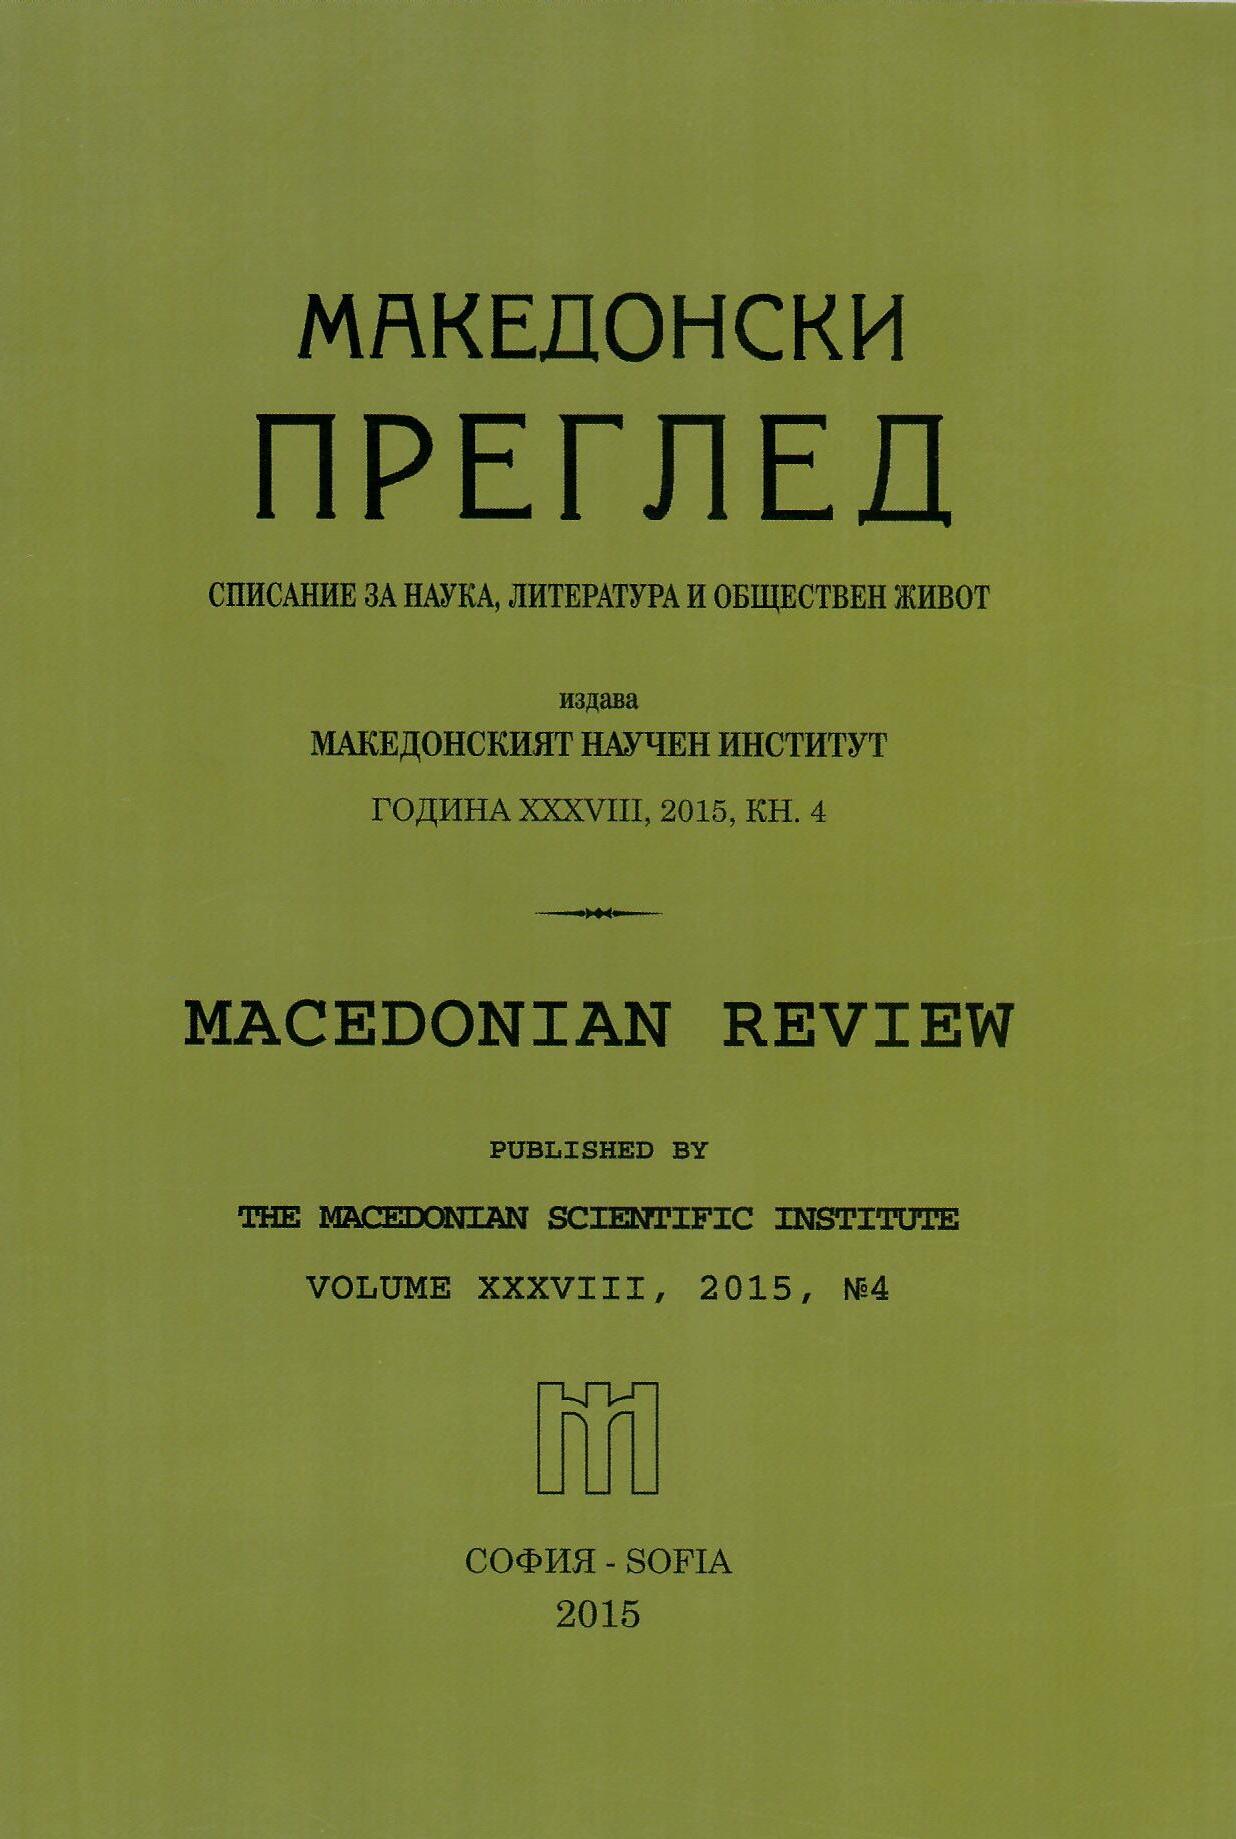 National-minority problems in Europe after the First World War and the Representation of the Bulgarians from Vardar Macedonia in Geneva Cover Image